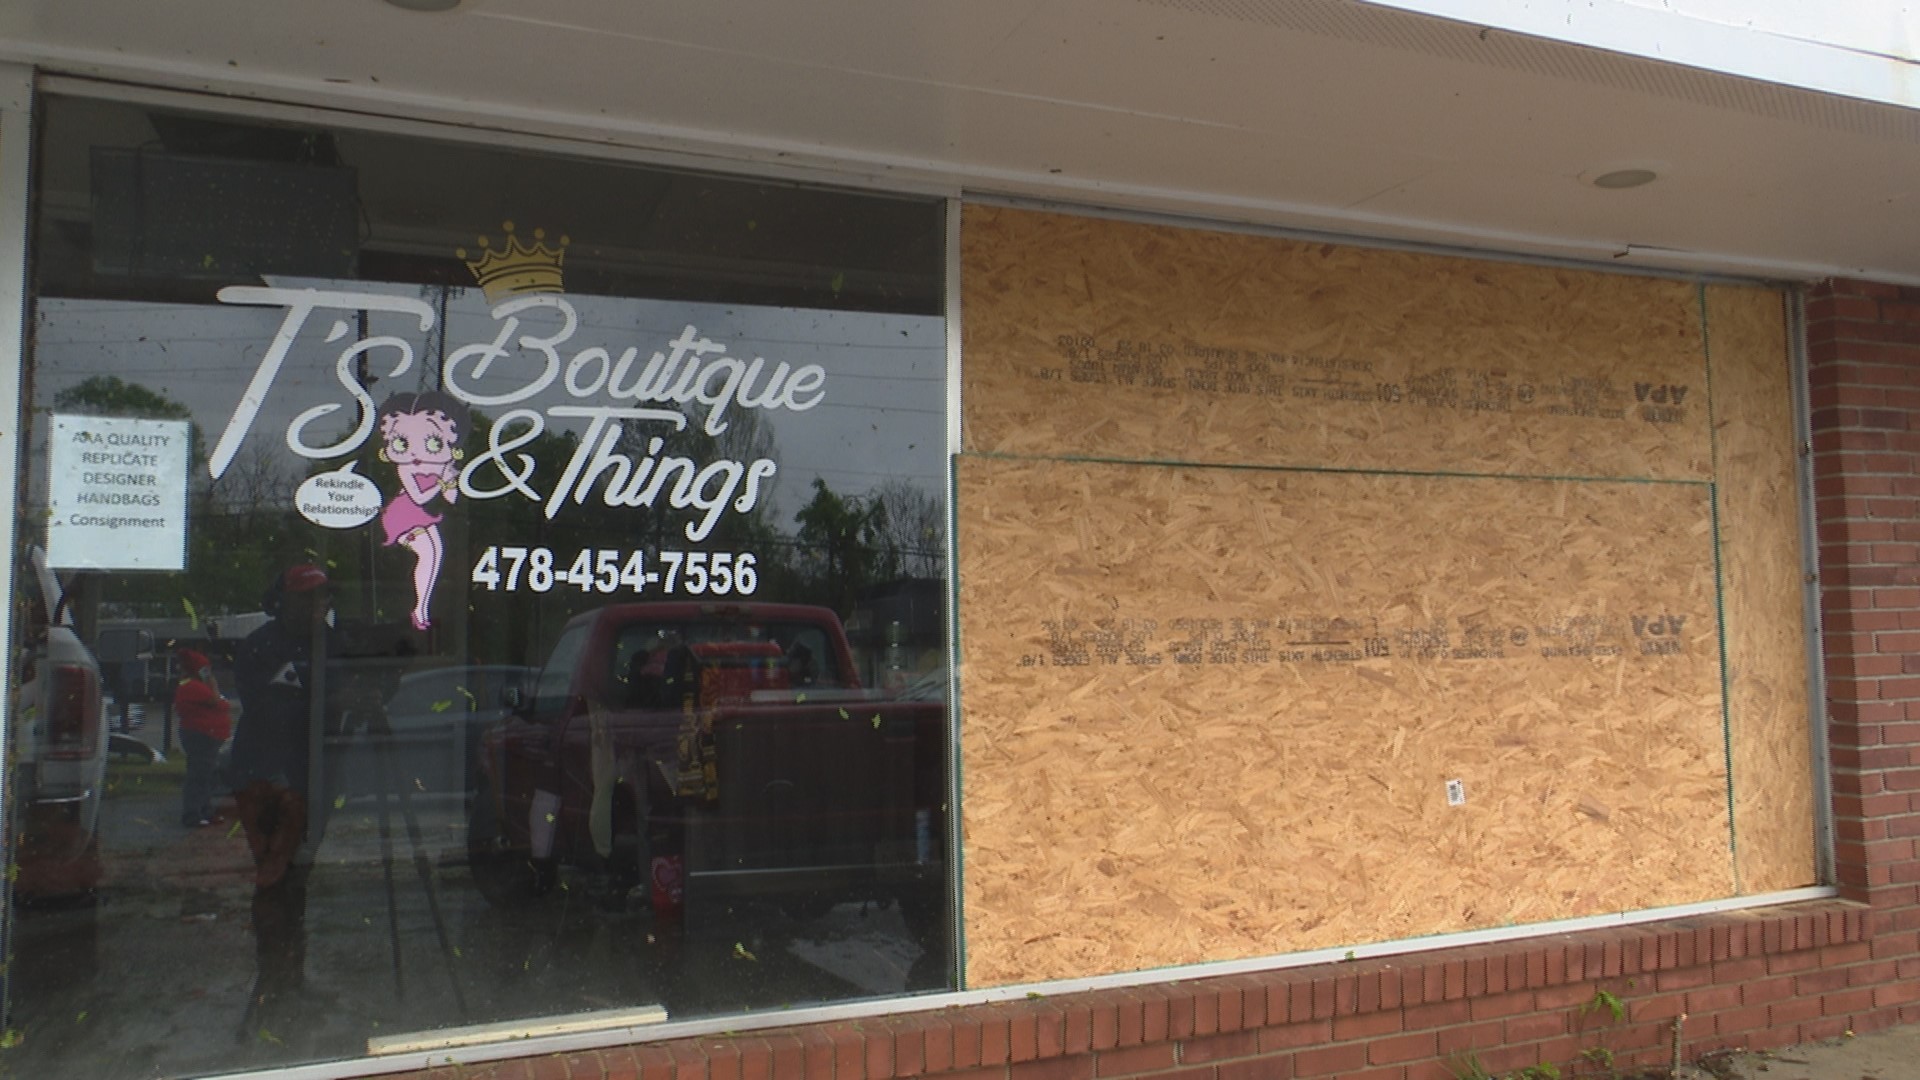 North Columbia Street saw damage to several businesses. Two tell us they have water damage, and need a new roof.